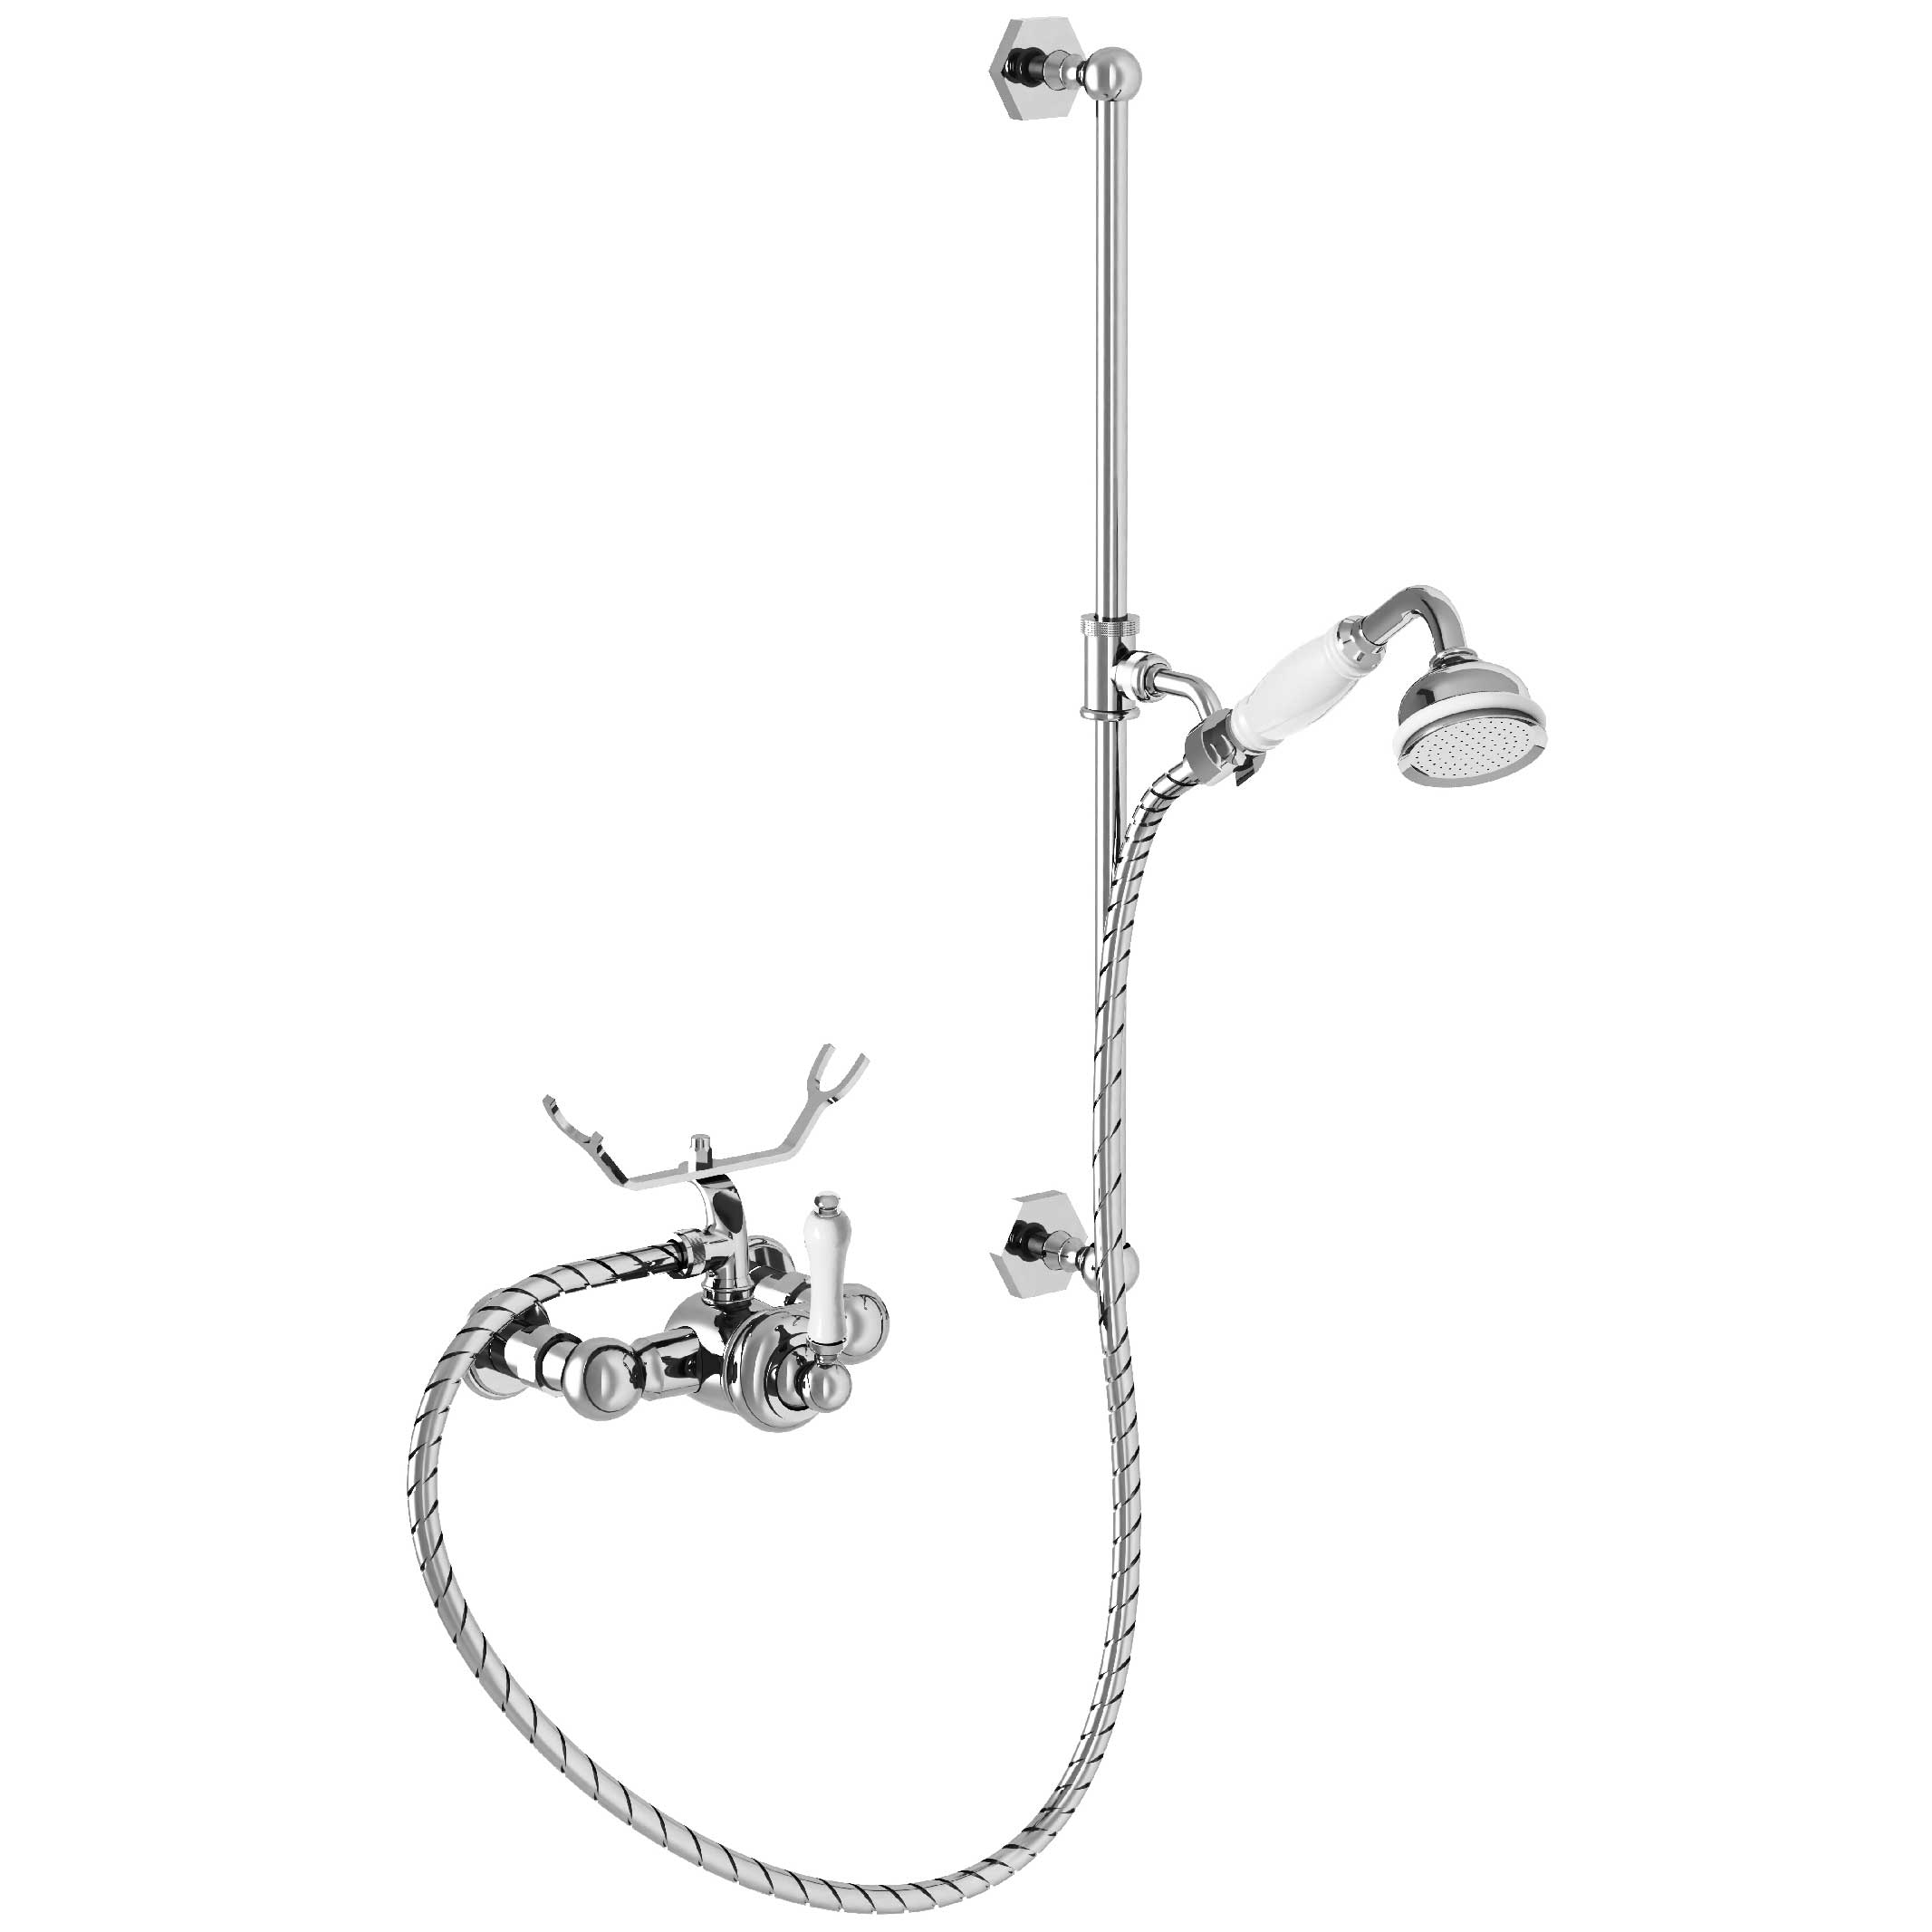 M32-2202M Single-lever shower mixer with sliding bar